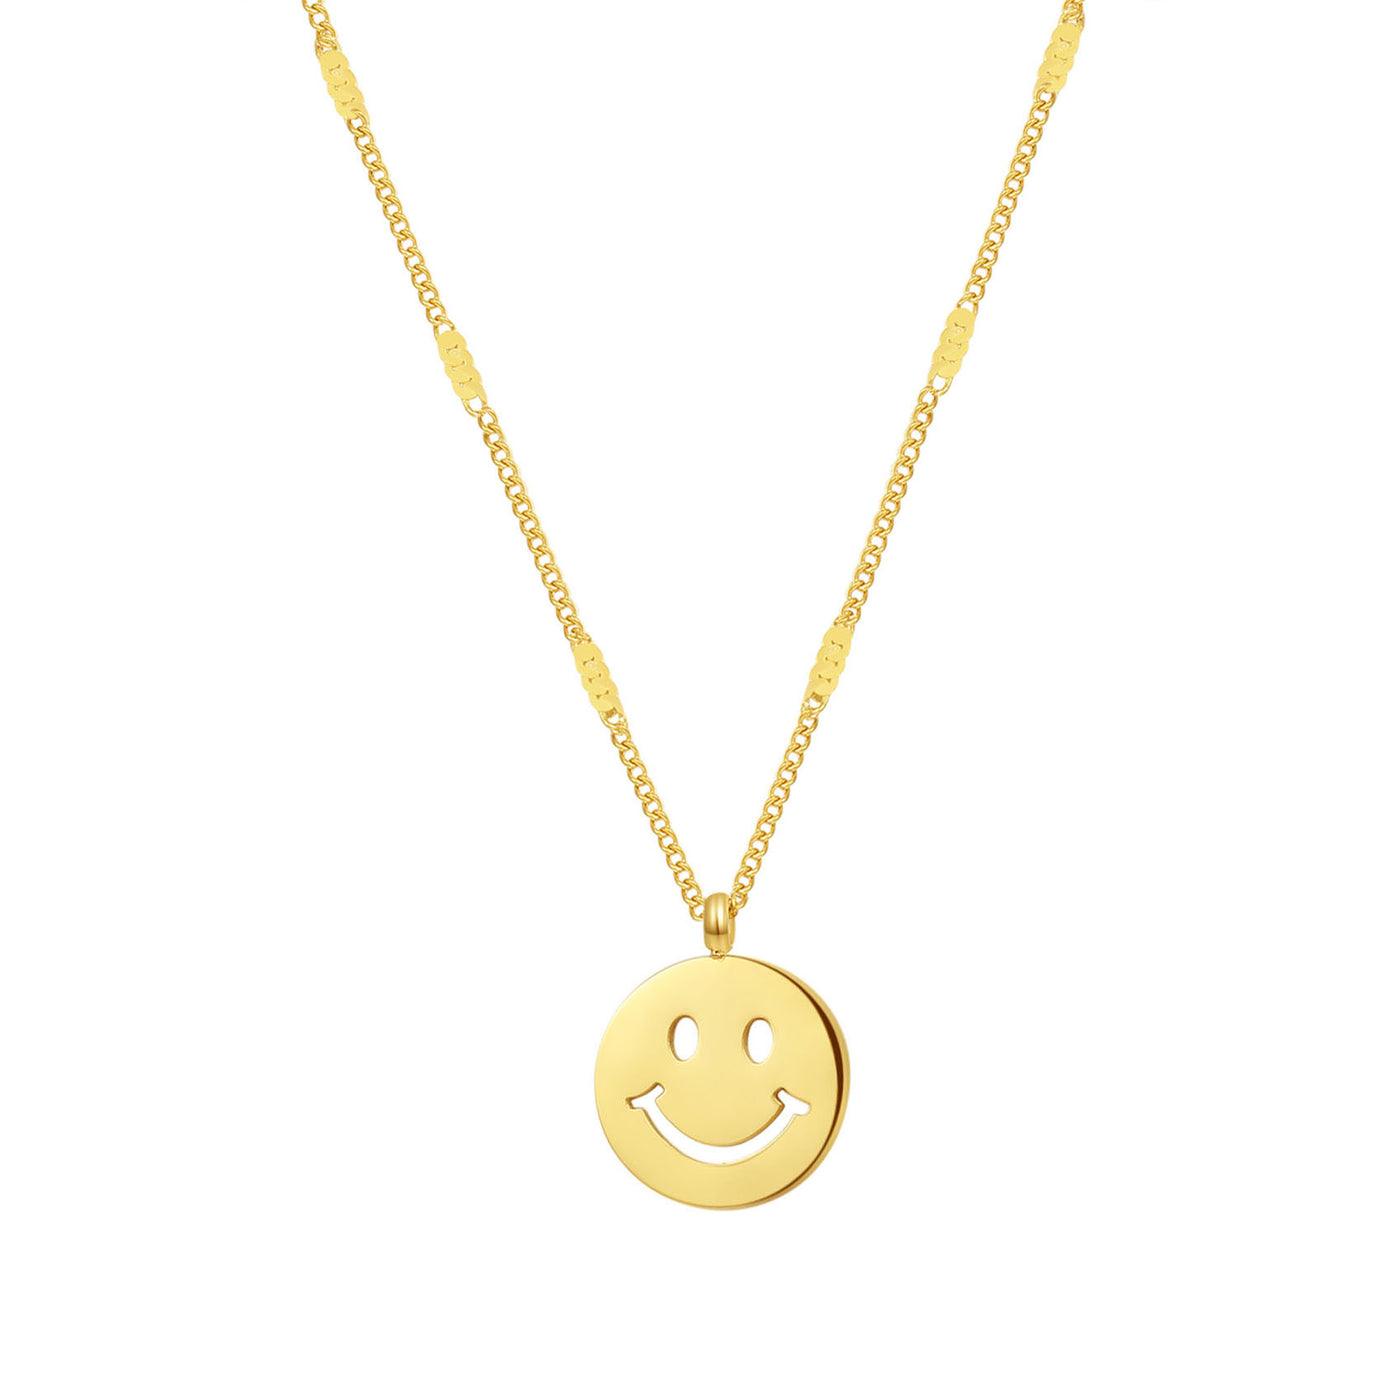 Kette Smiley Gesicht Anhänger Sterlingsilber Happiness Gold Hey – in